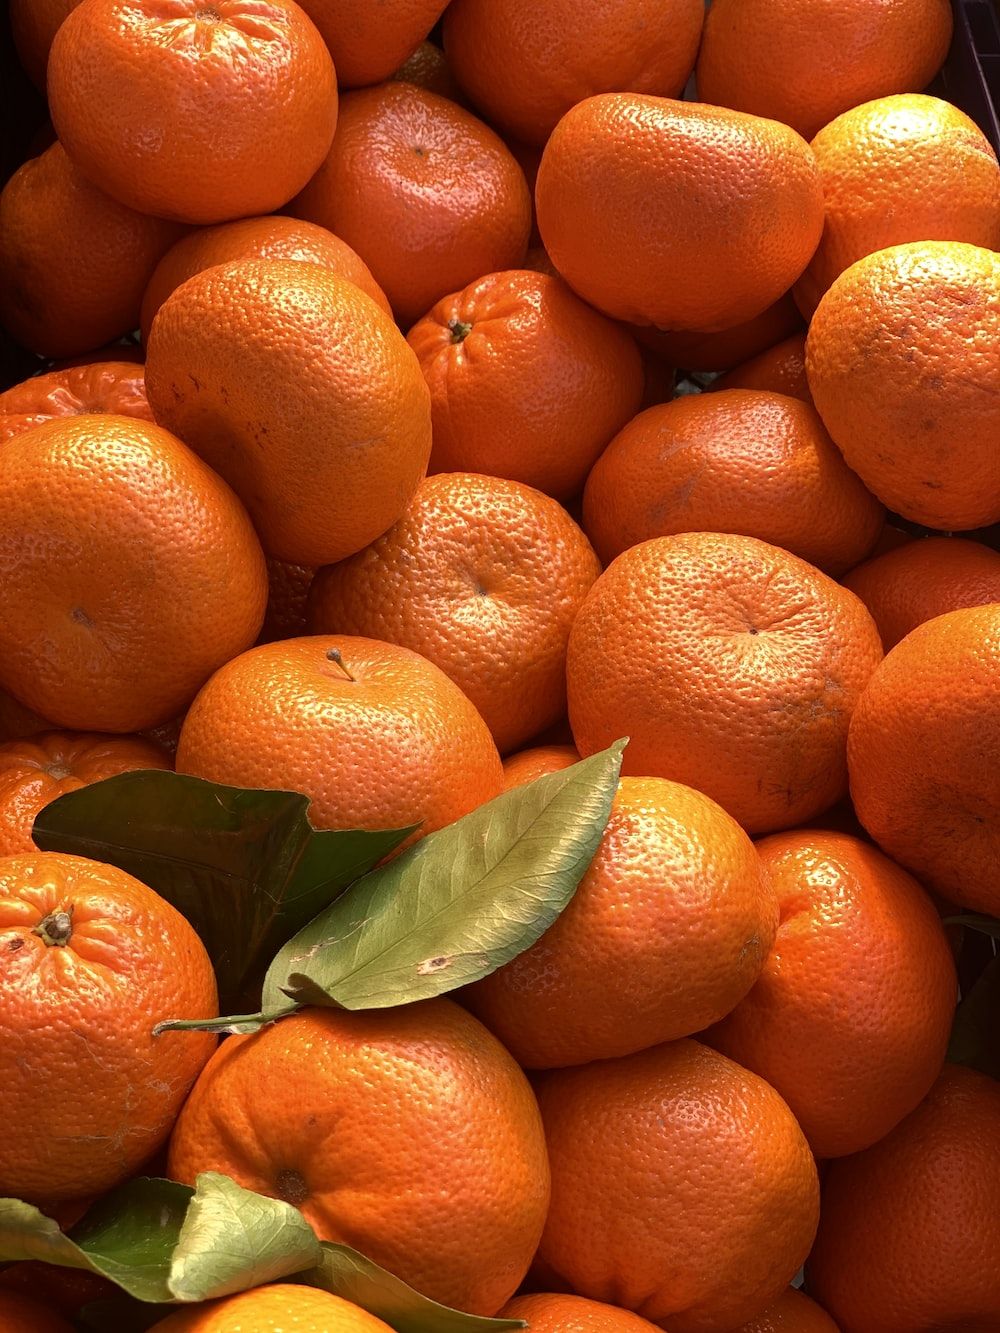 A pile of oranges with leaves on them - Fruit